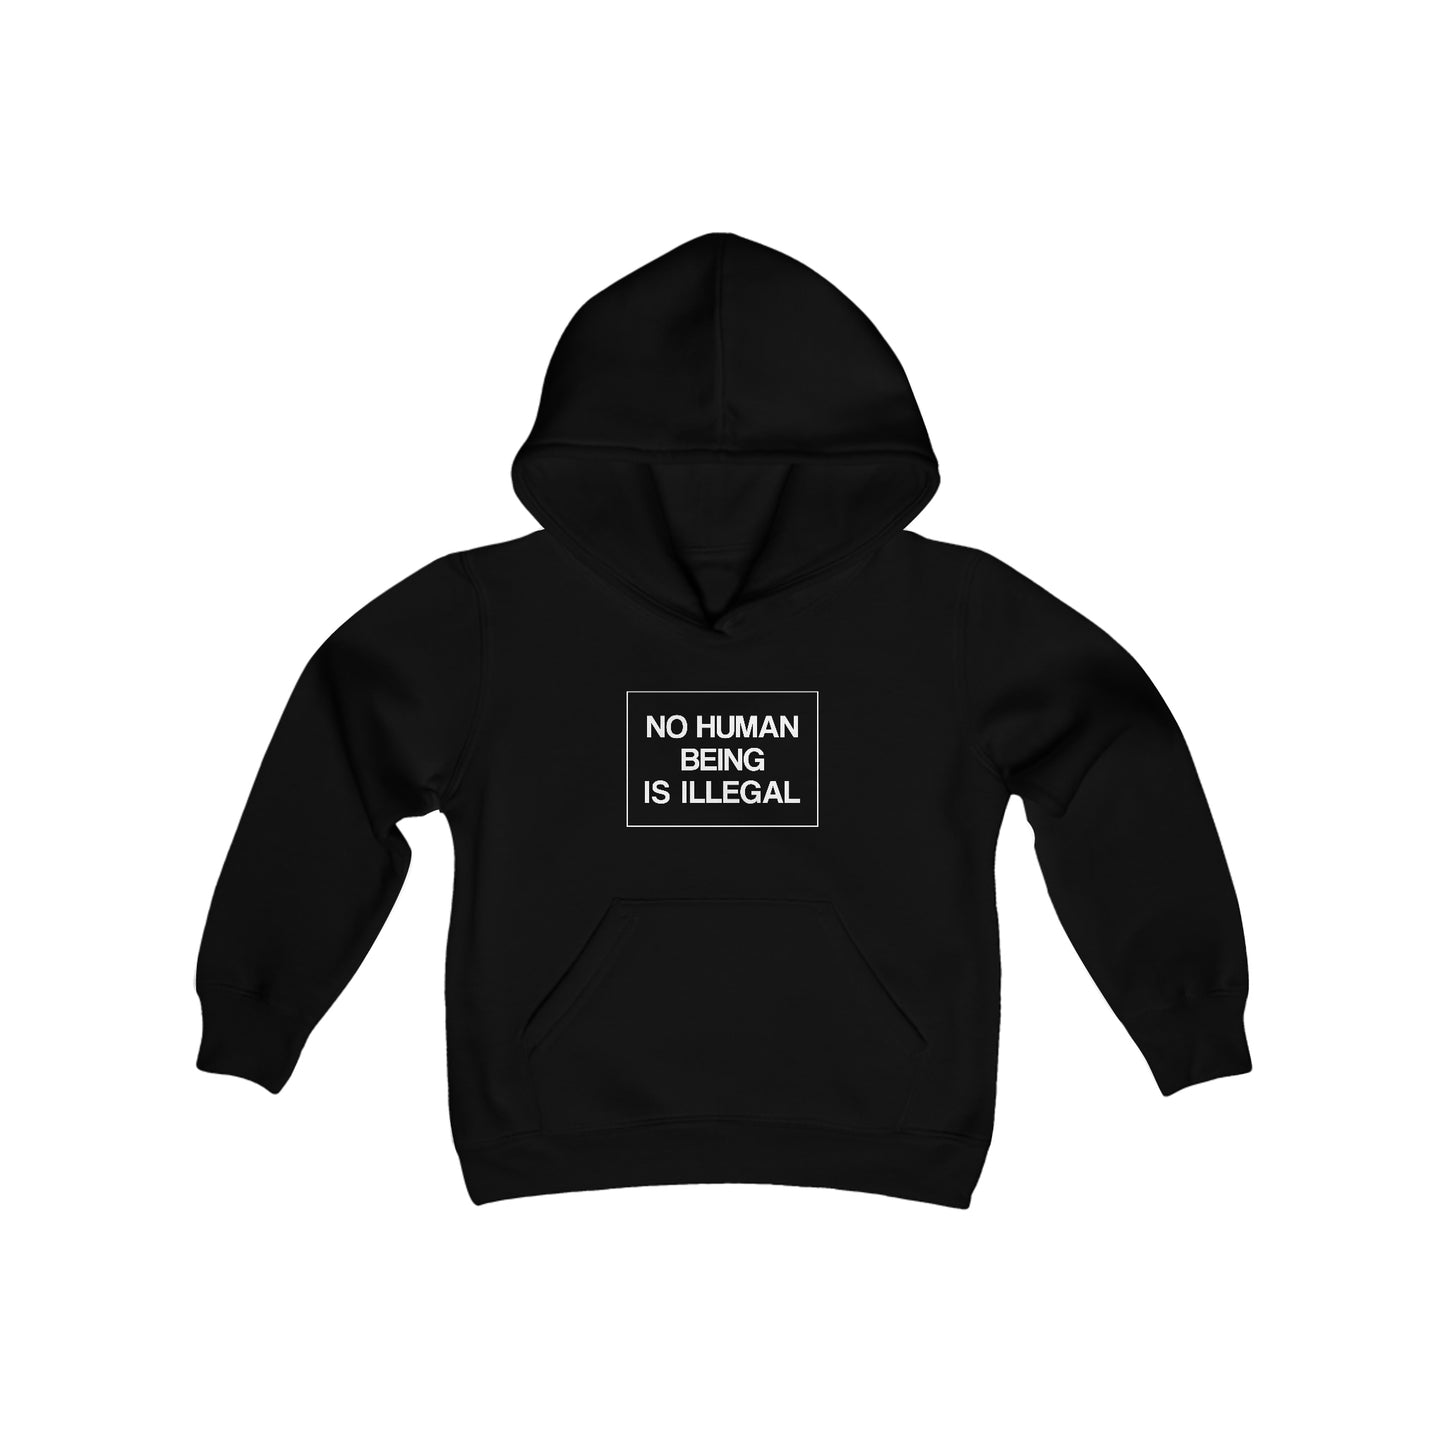 “No Human Being is Illegal” Youth Hoodie